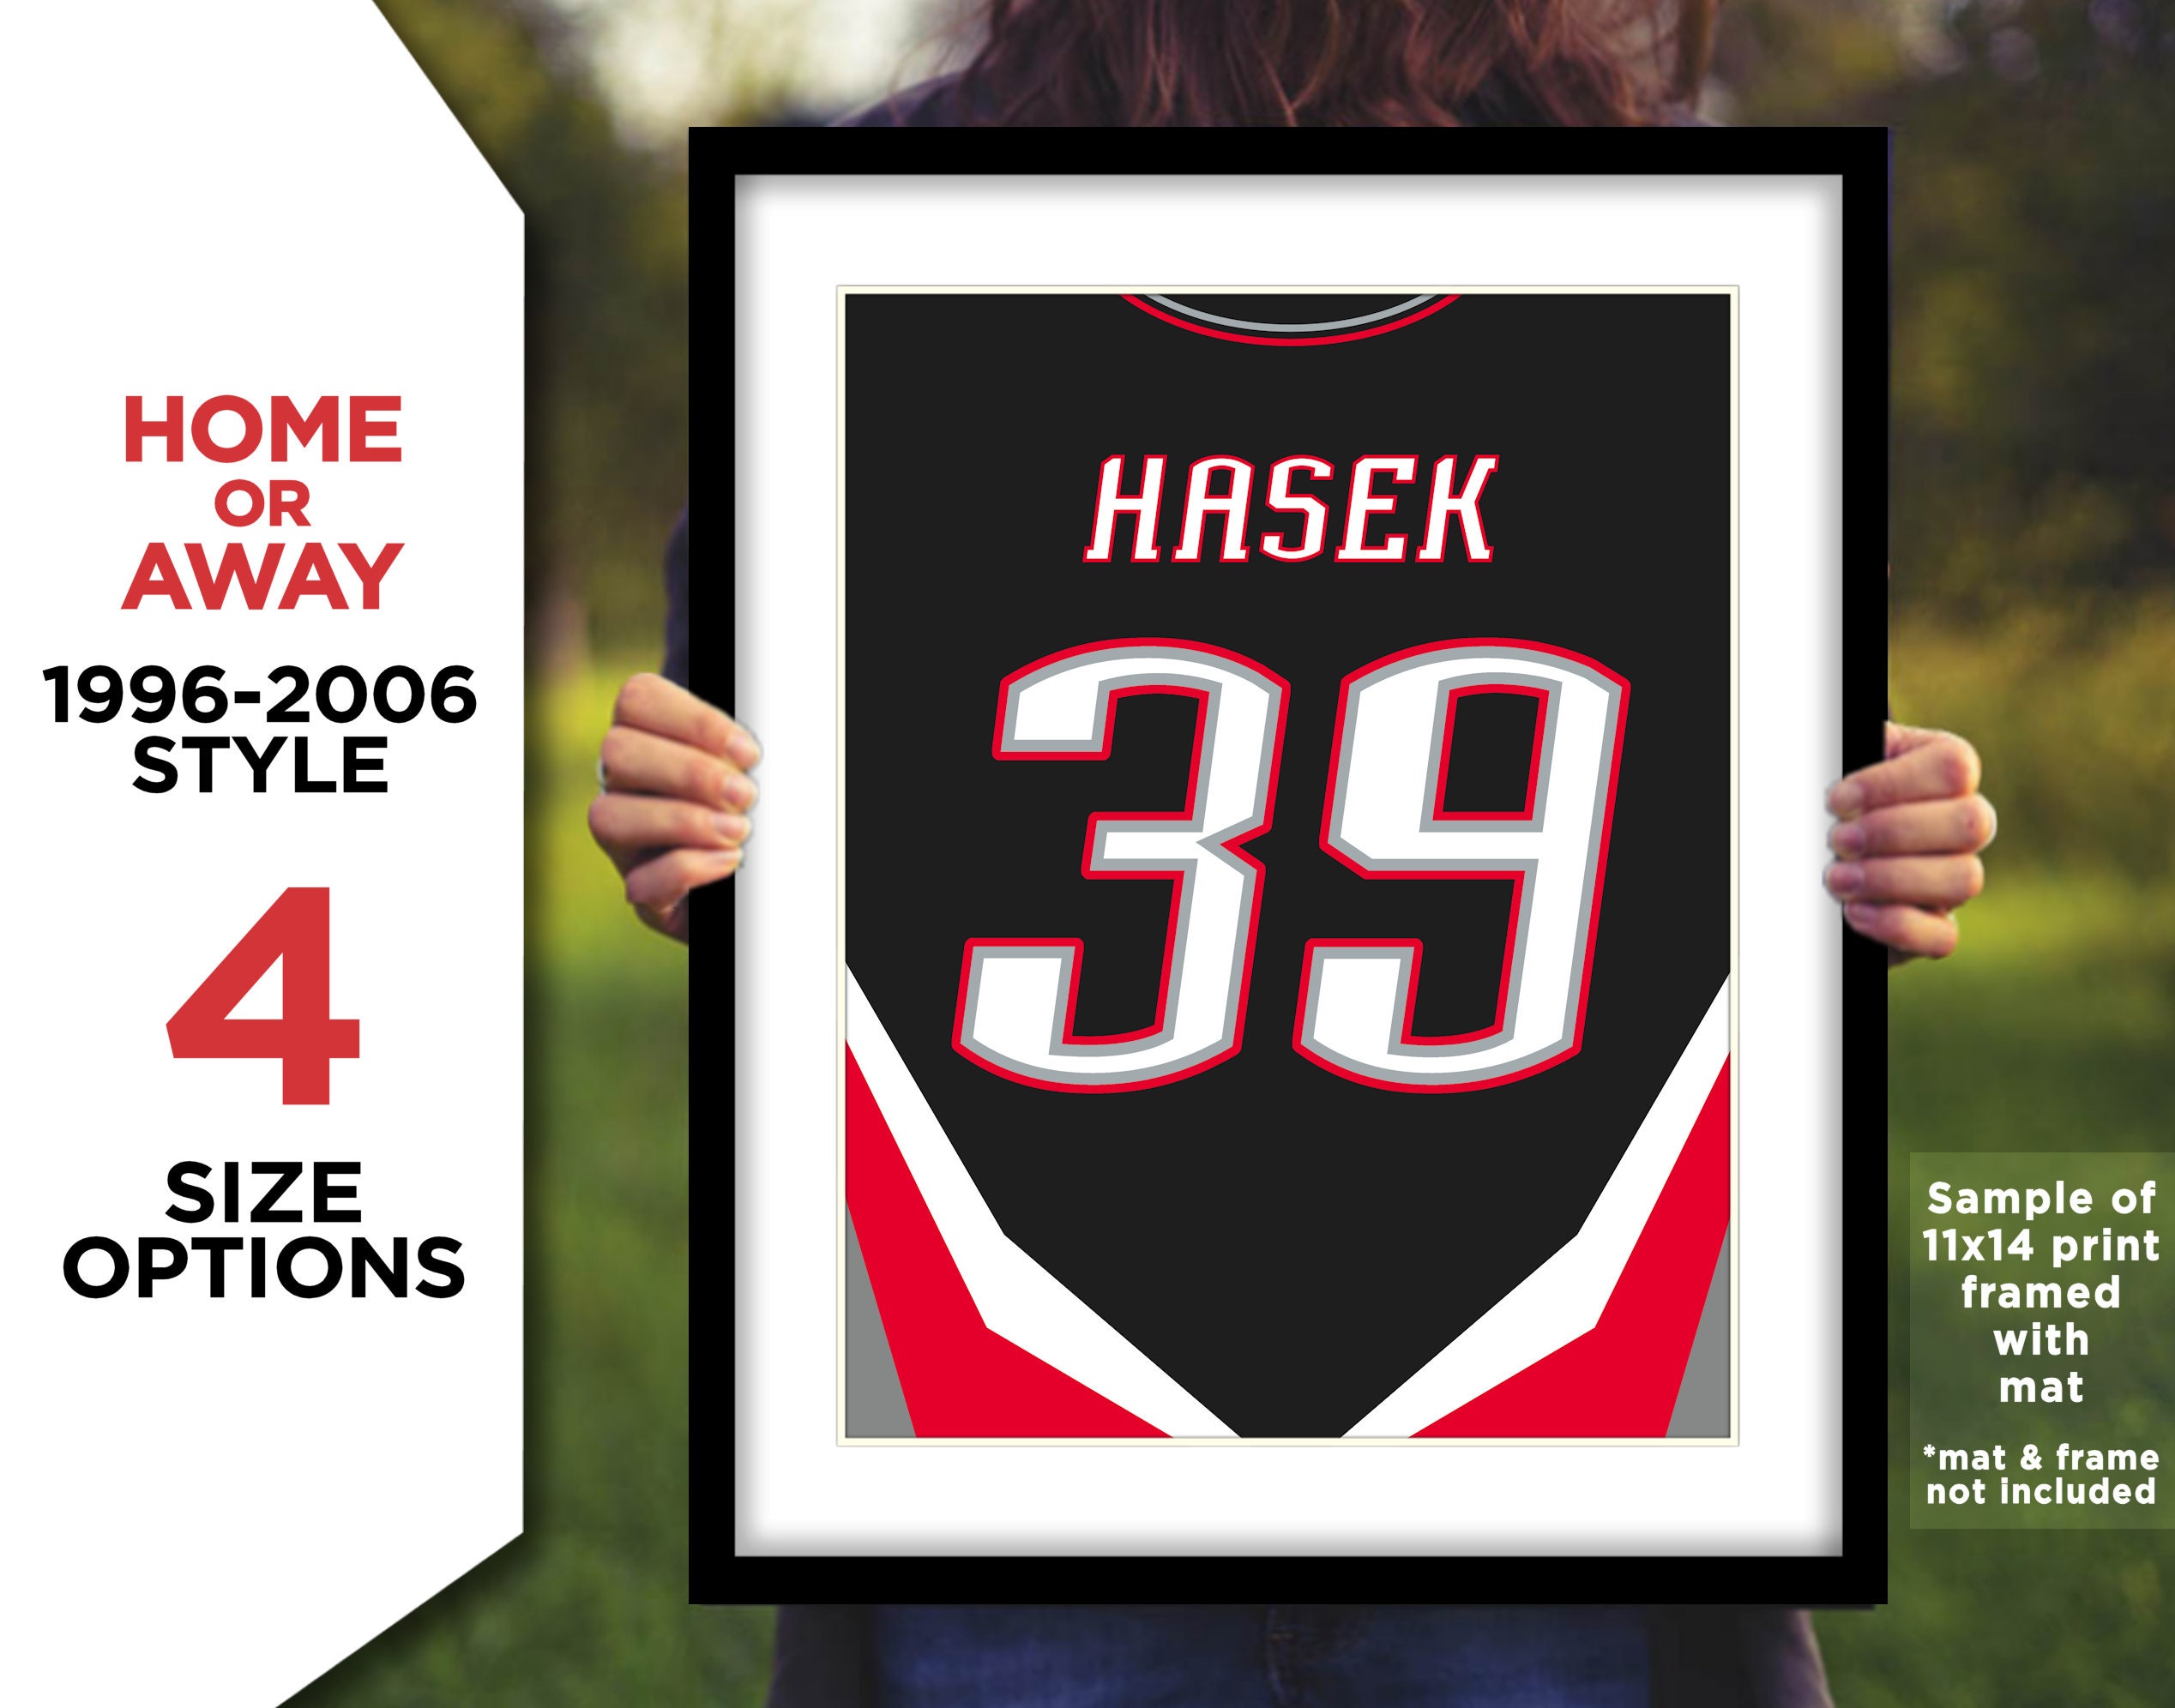 DOMINIK HASEK SIGNED BUFFALO SABRES GAME JERSEY WITH CERTIFICATE OF  AUTHENTICITY. HASEK WAS - Able Auctions